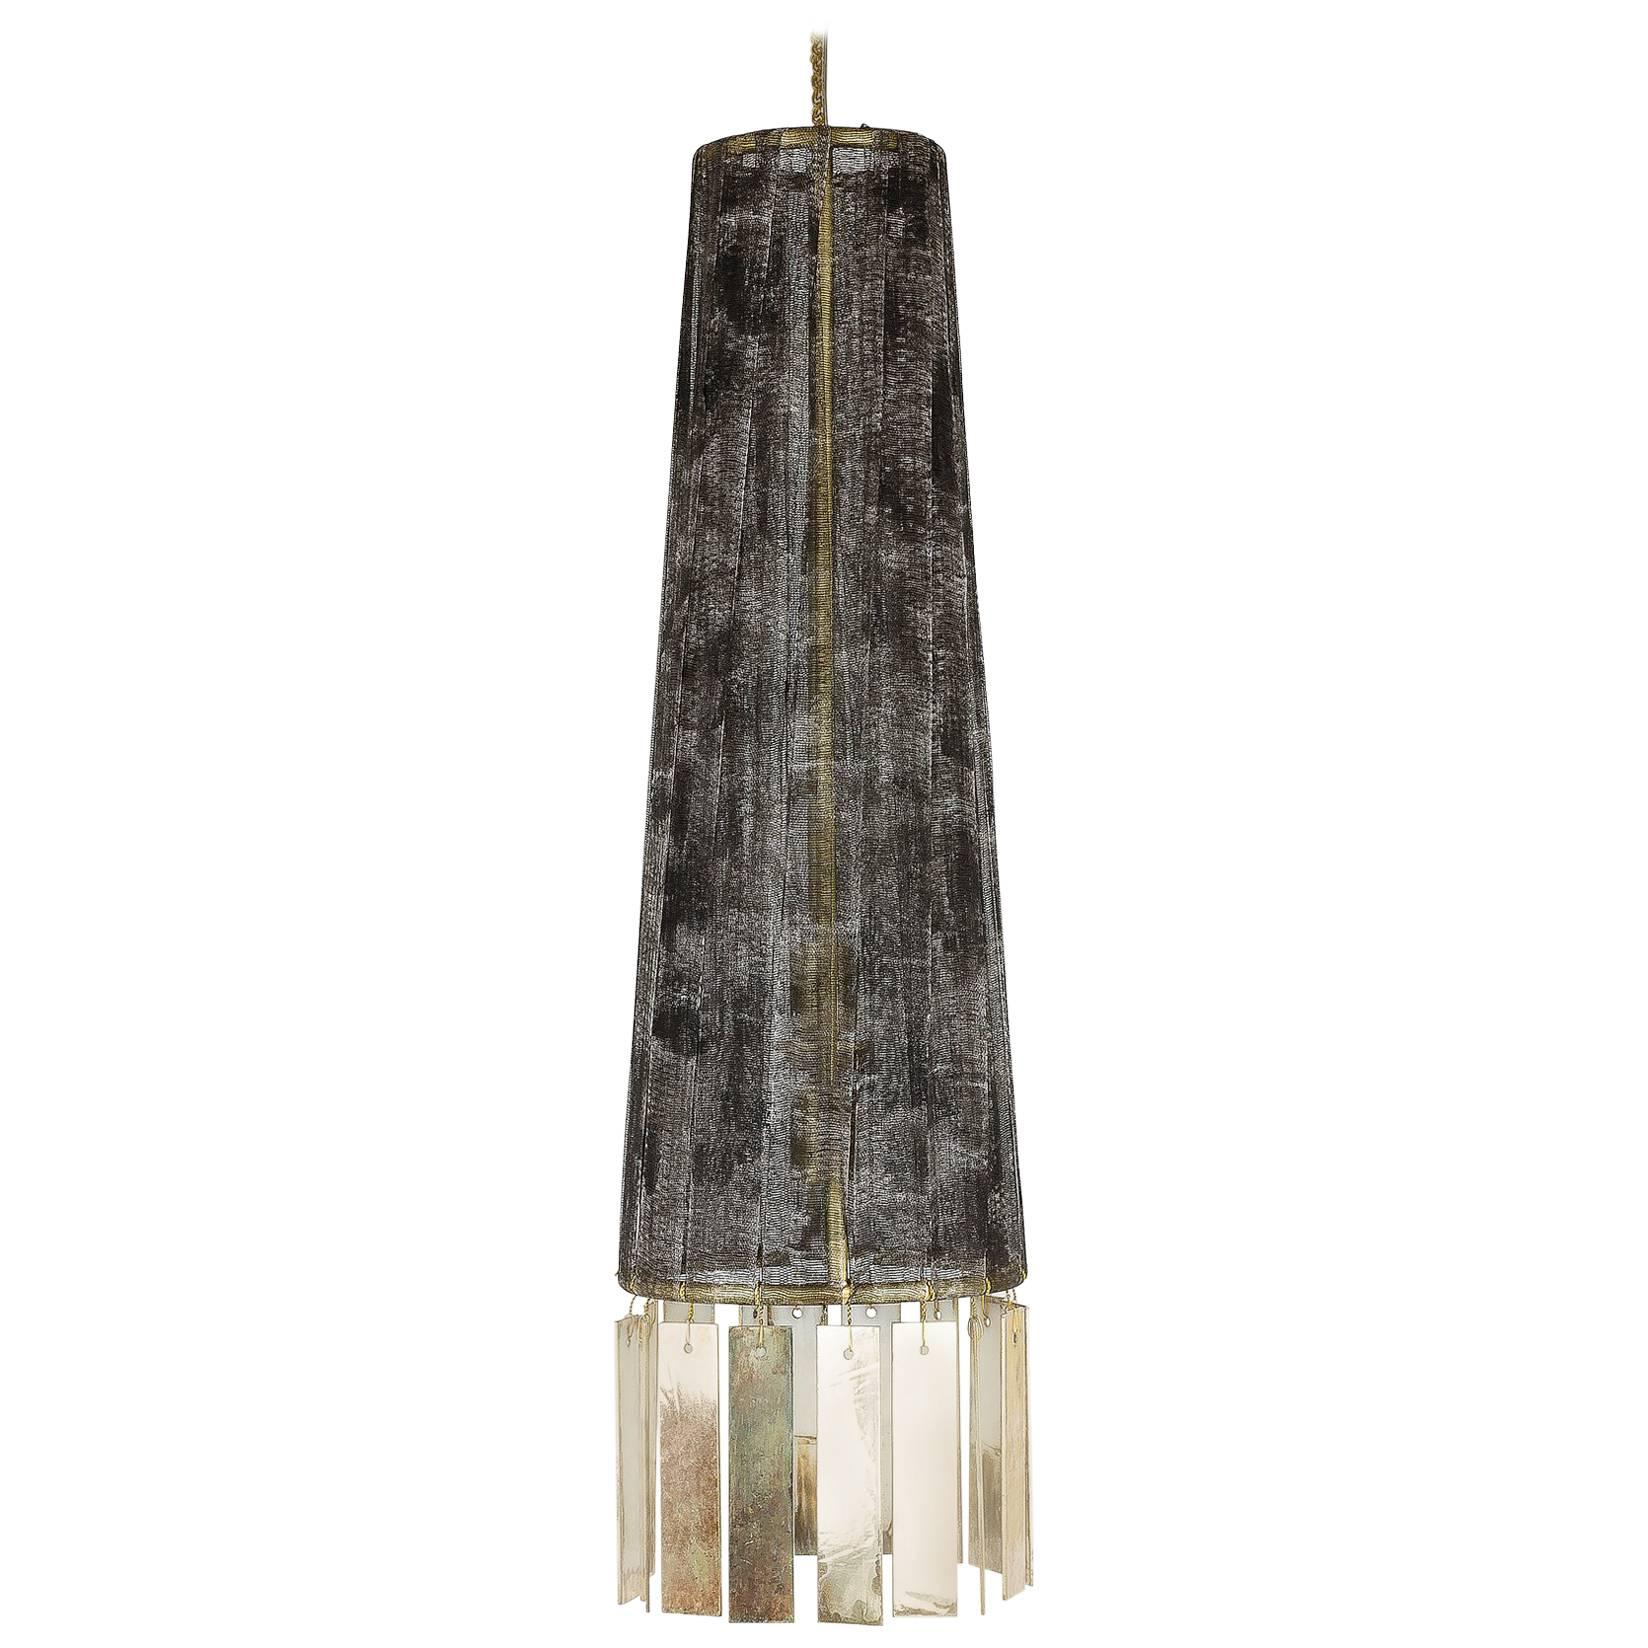 Magic Contemporary Hanging Lamp, Black Hand-Painted Gauze, Double Silvered Glass